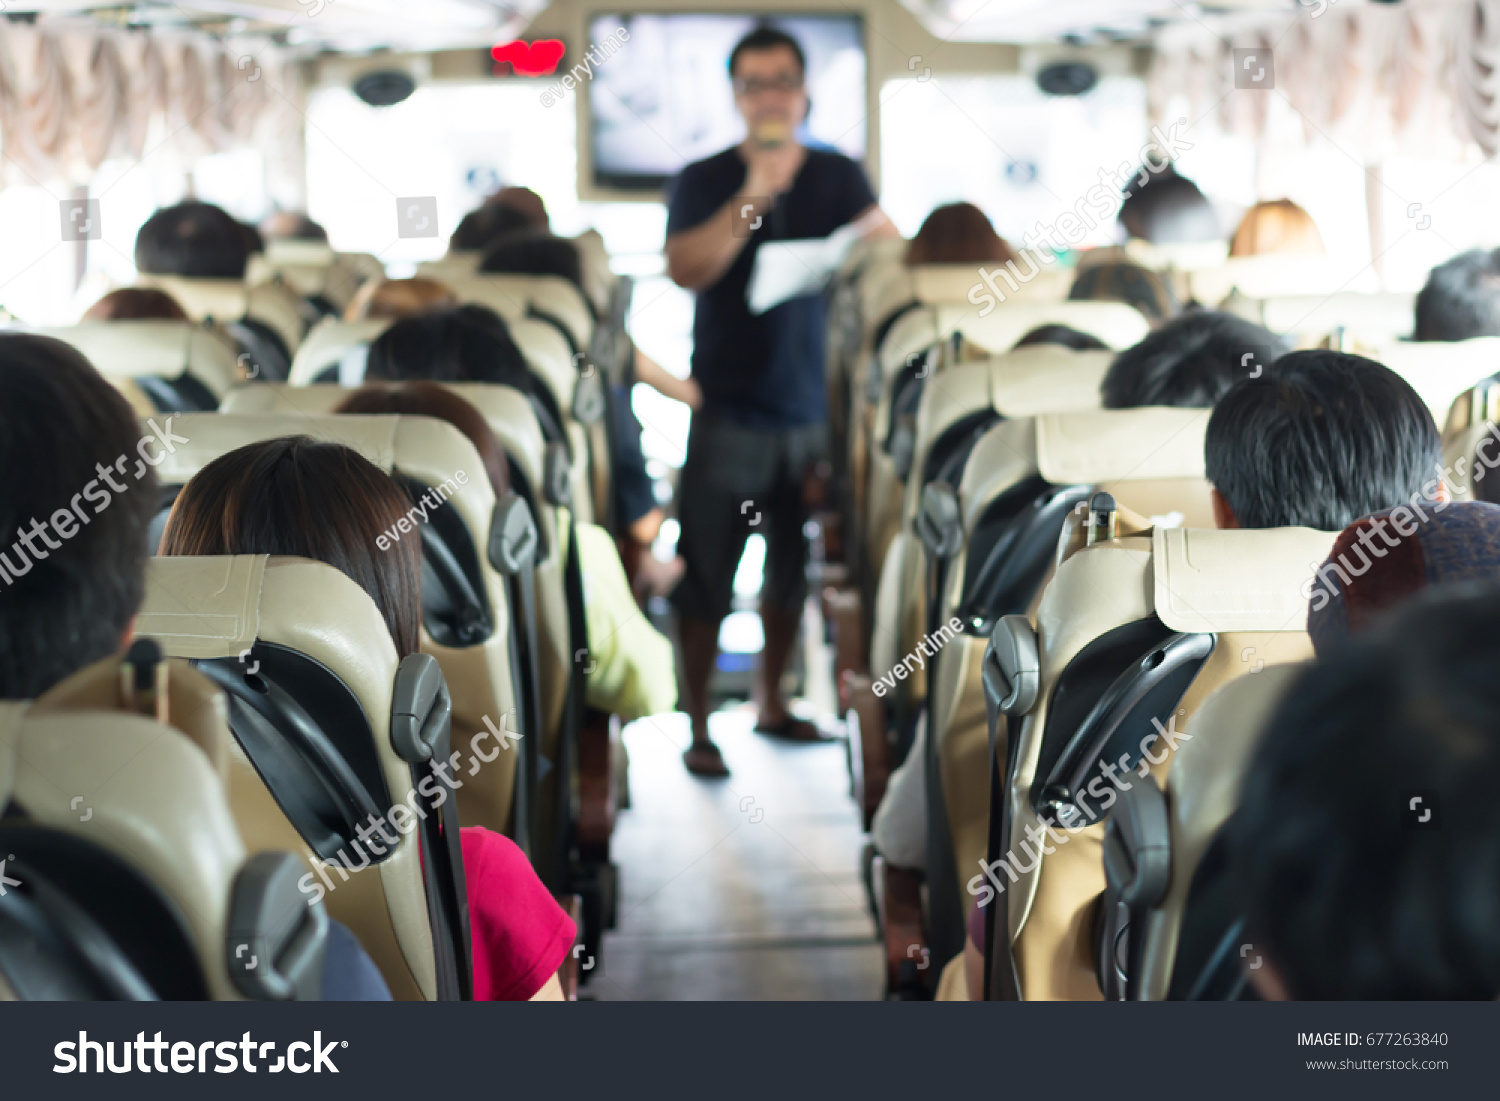 Selective focus image of Private bus with tourists and guided tour. #677263840